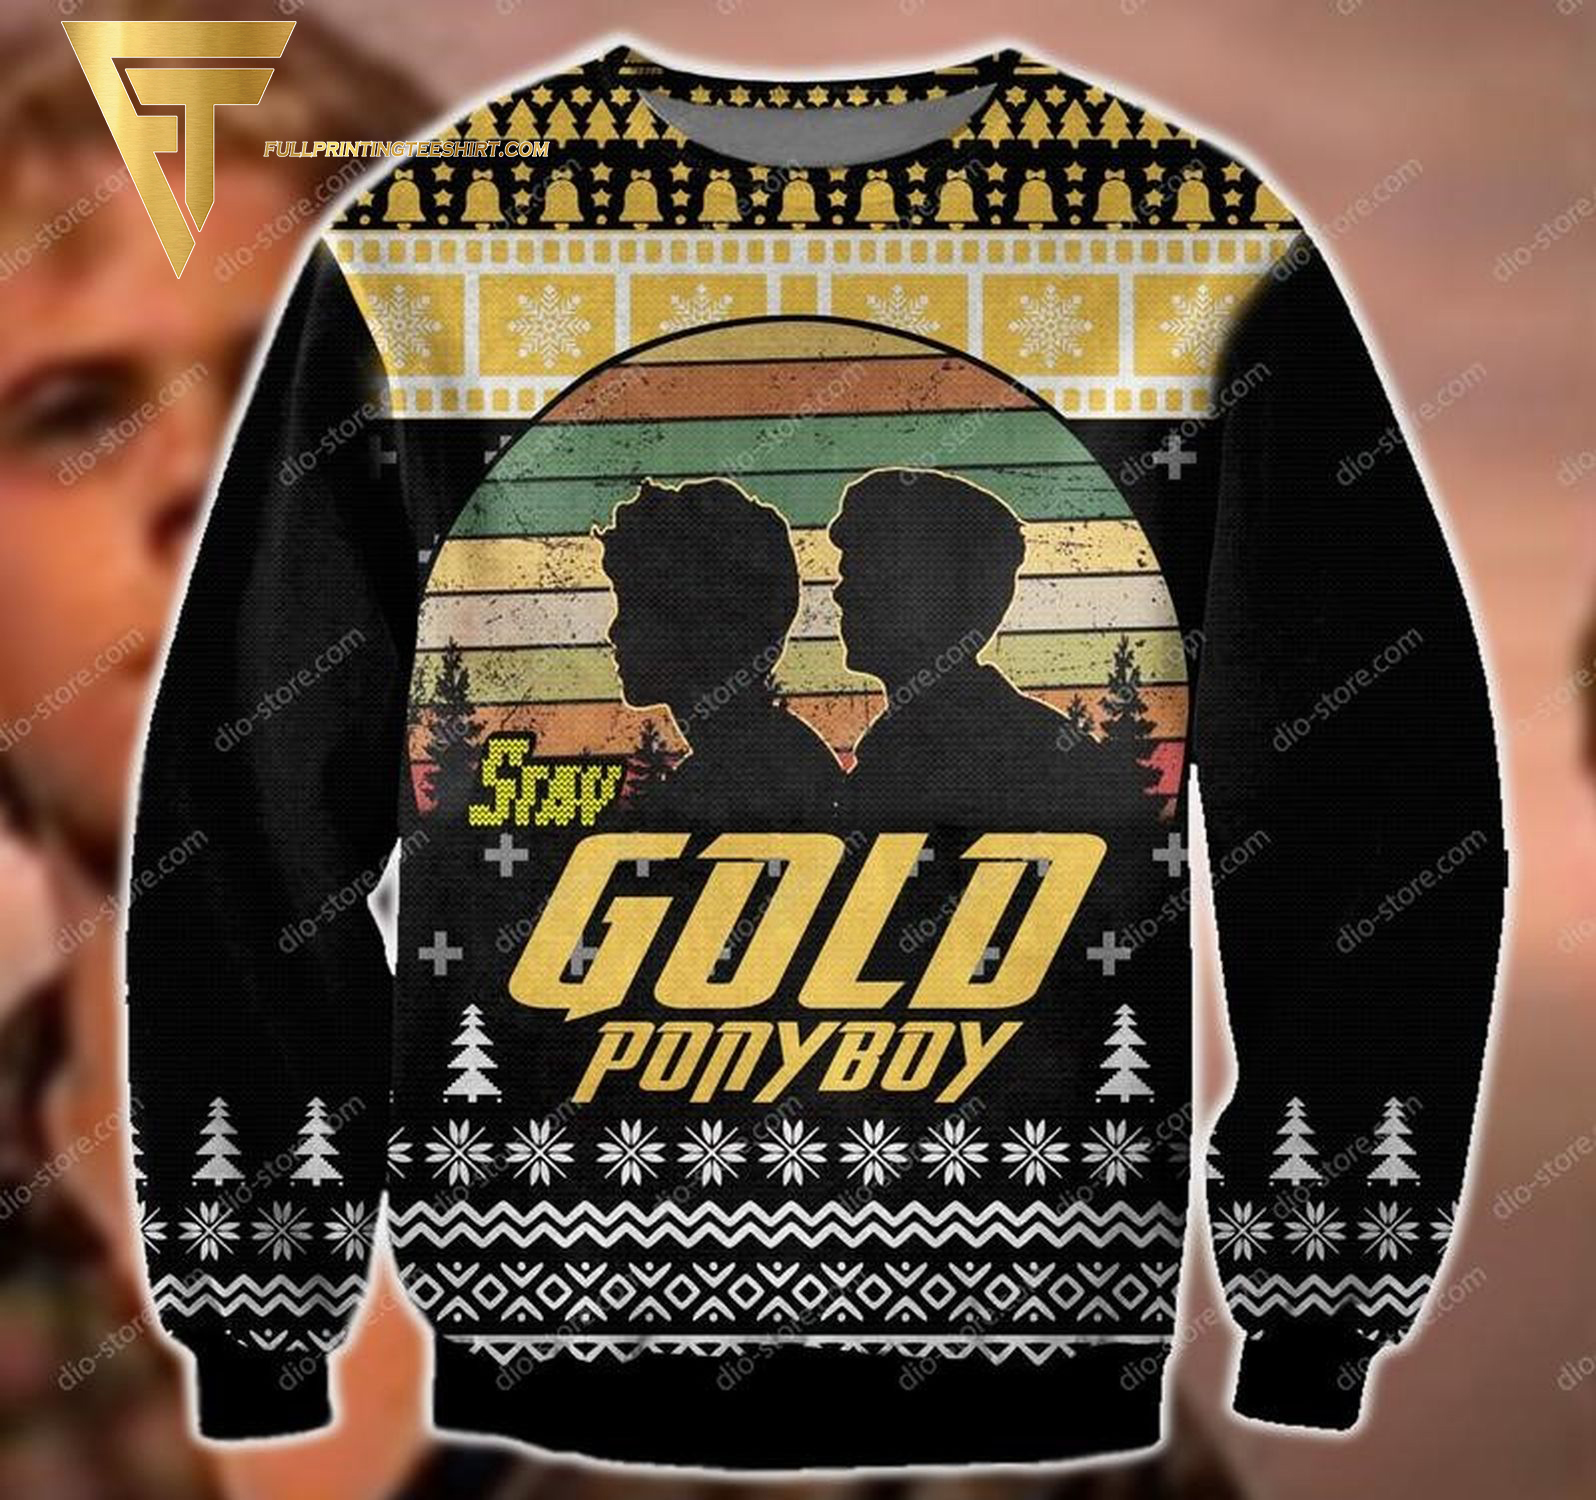 The Outsiders Stay gold Ponyboy Full Print Ugly Christmas Sweater - Copy